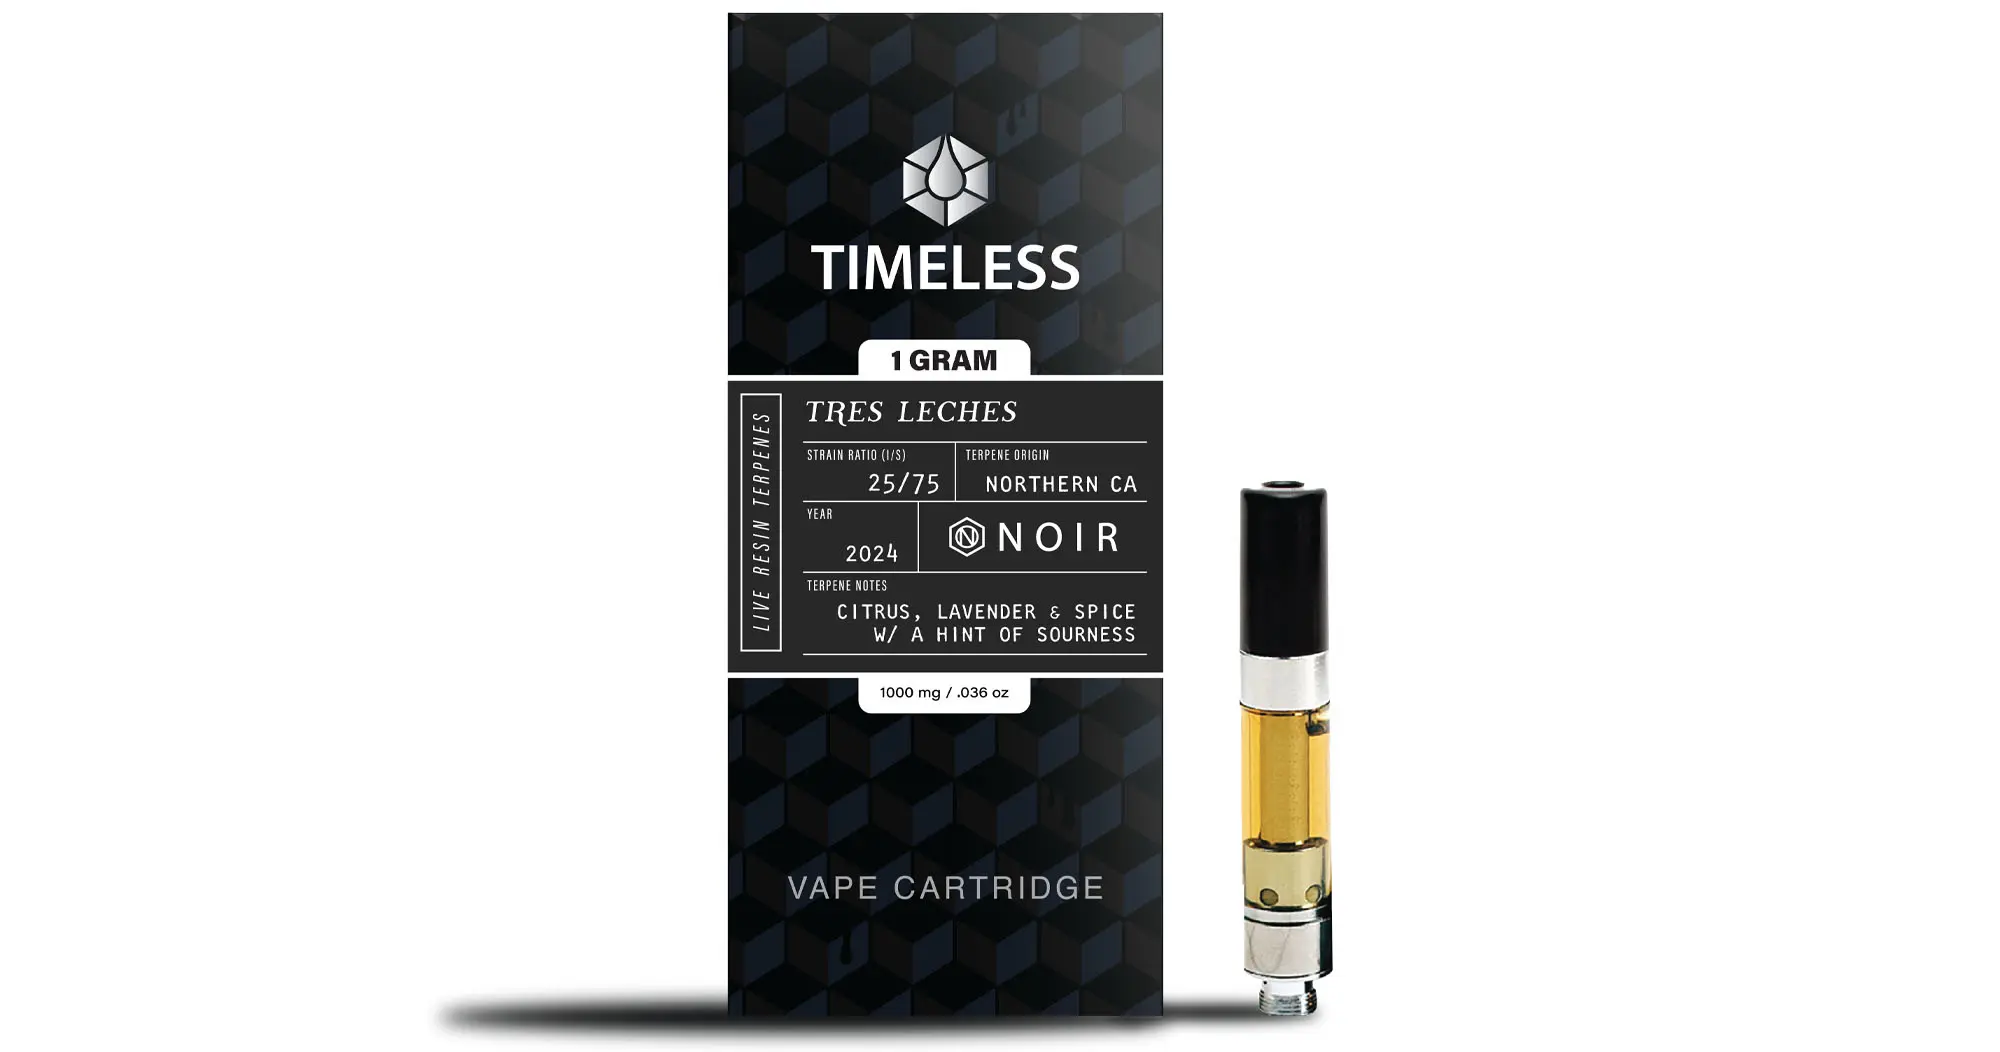 Tres Leches Live Resin Cartridge